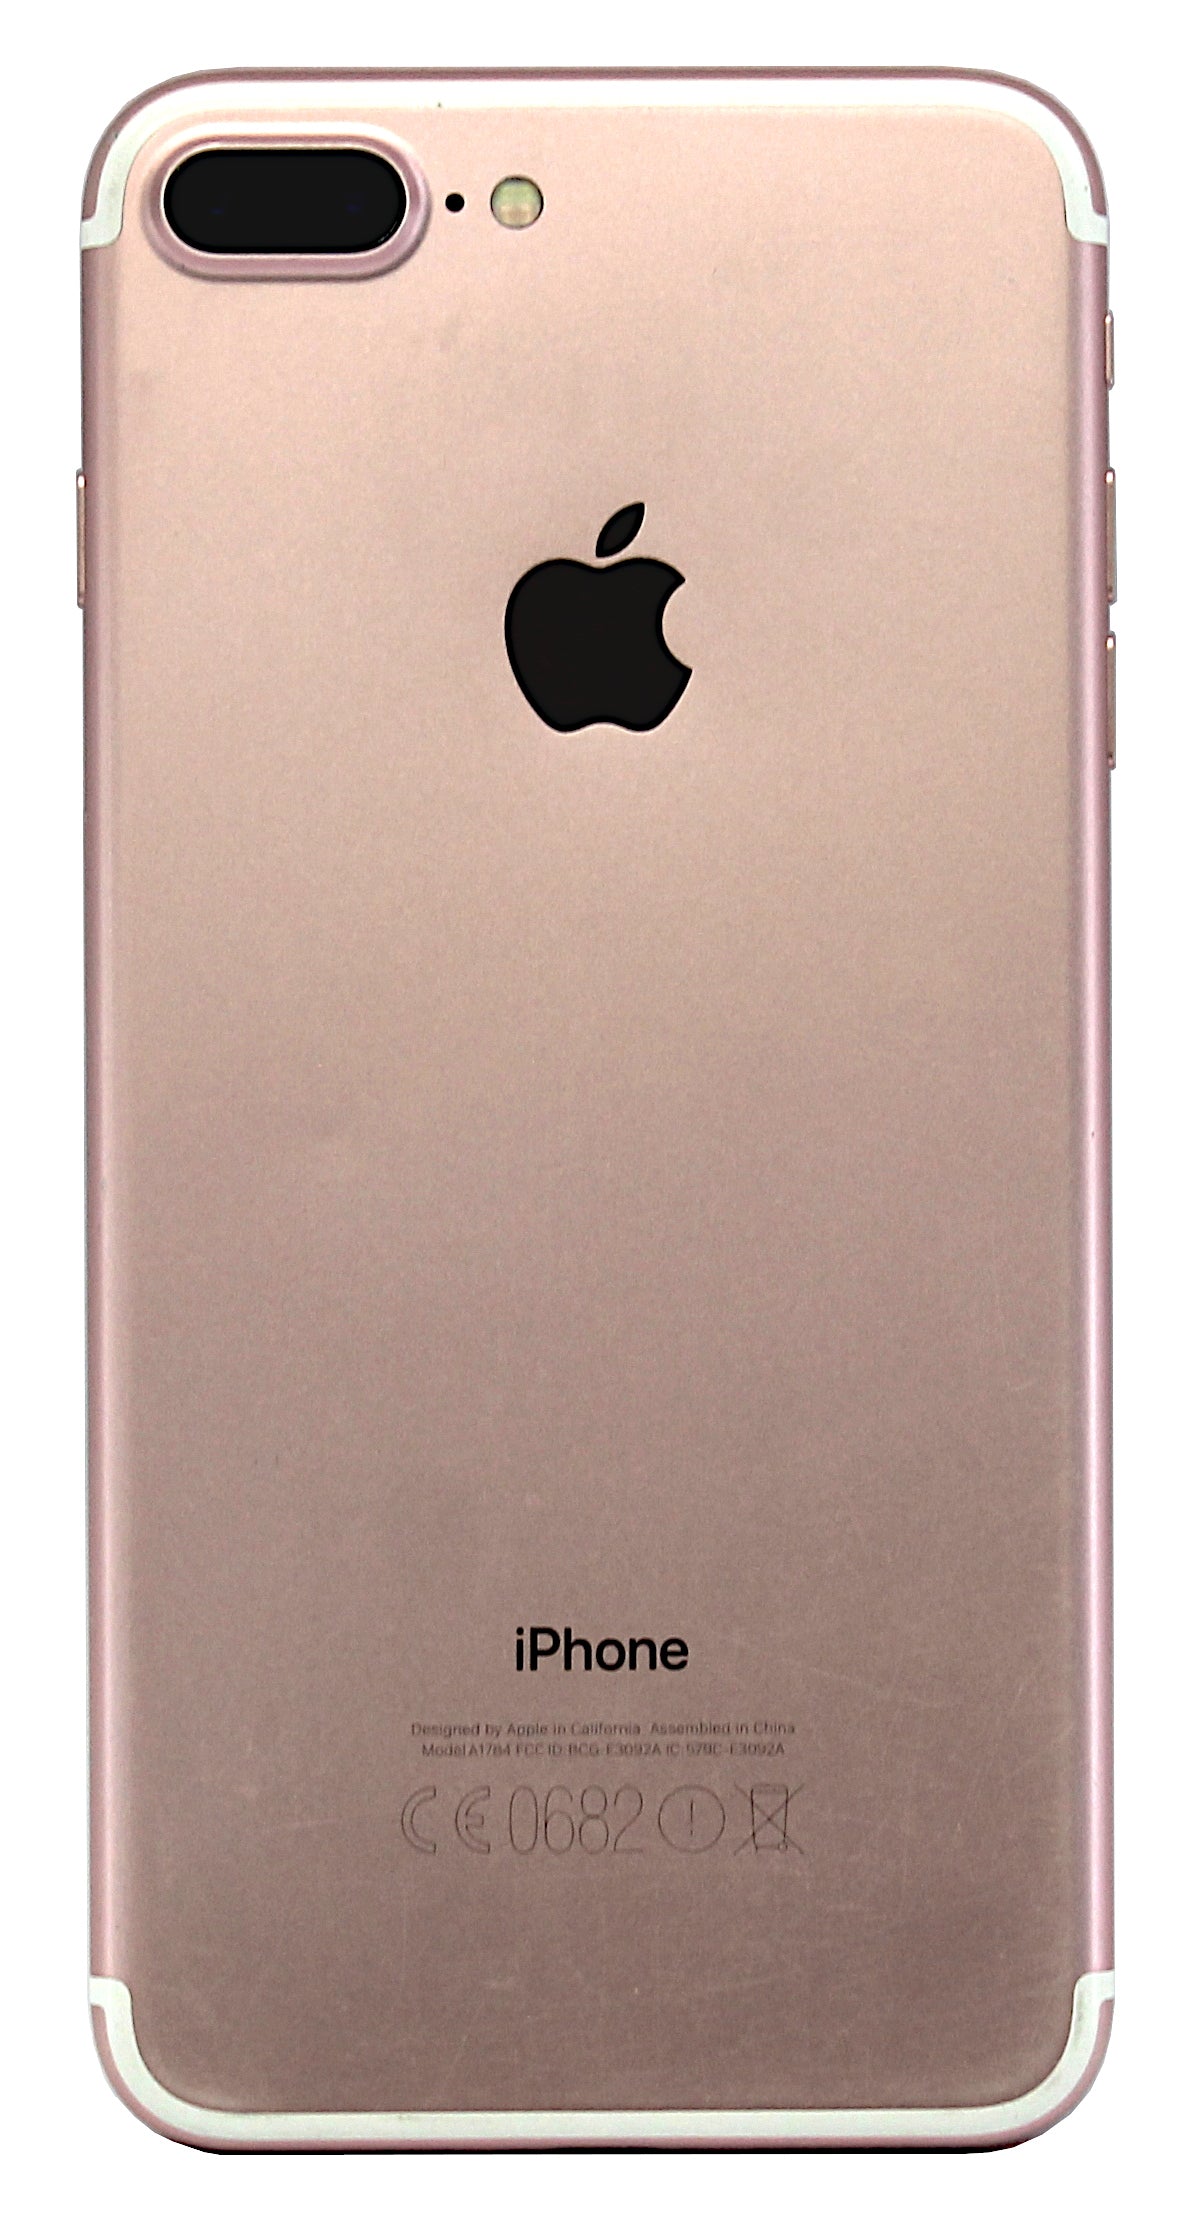 Apple iPhone 7 Plus Smartphone, 128GB, Network Unlocked, Rose Gold, A1784